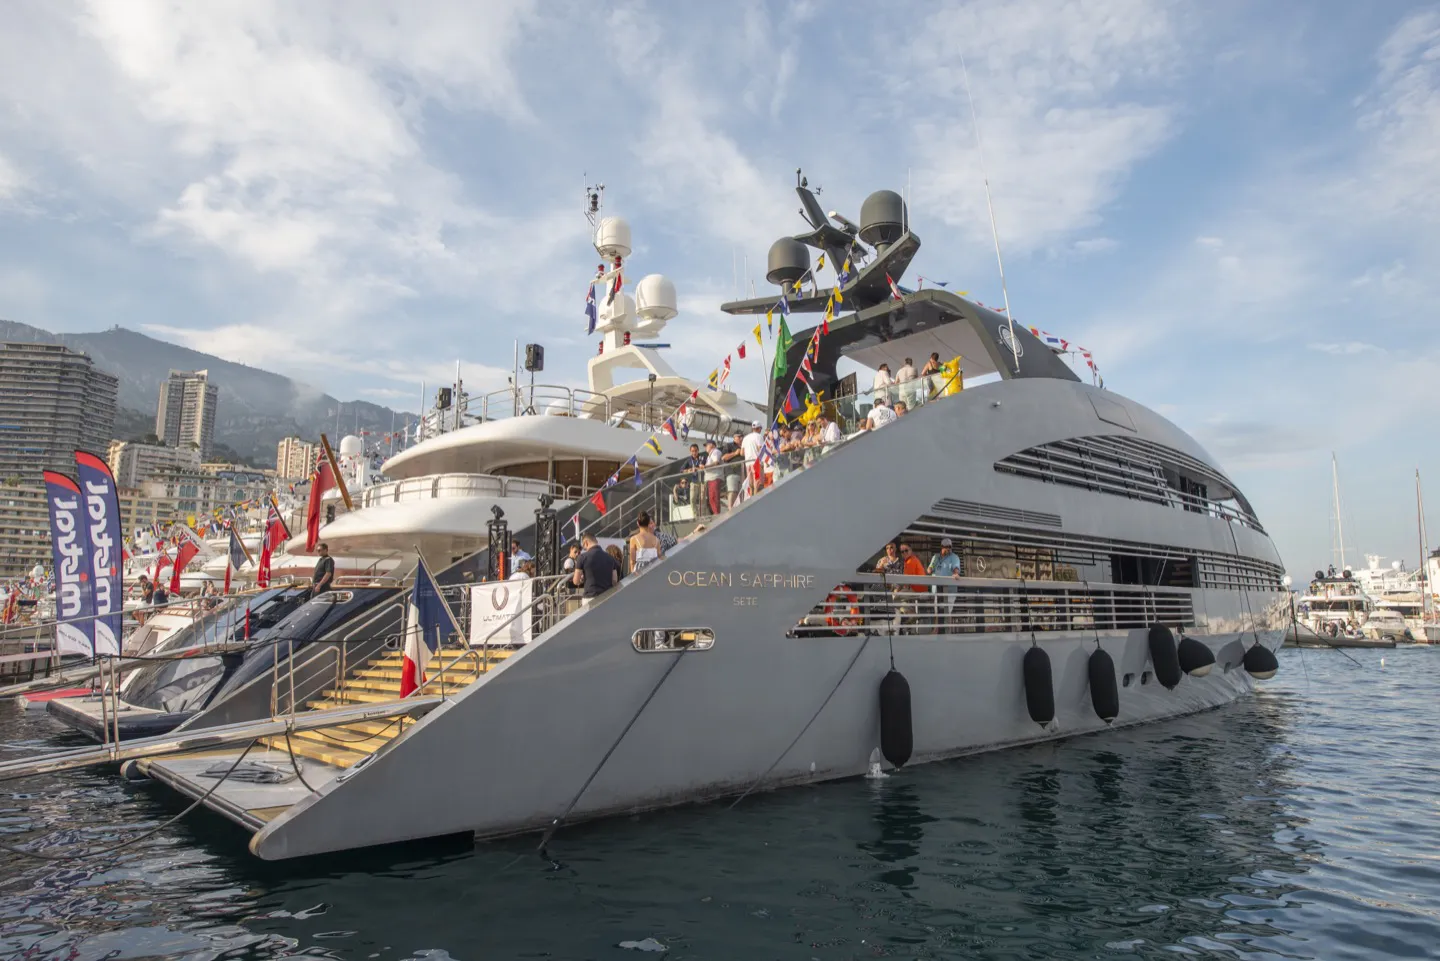 Guests aboard a superyacht for the F1 Grand Prix of Monaco